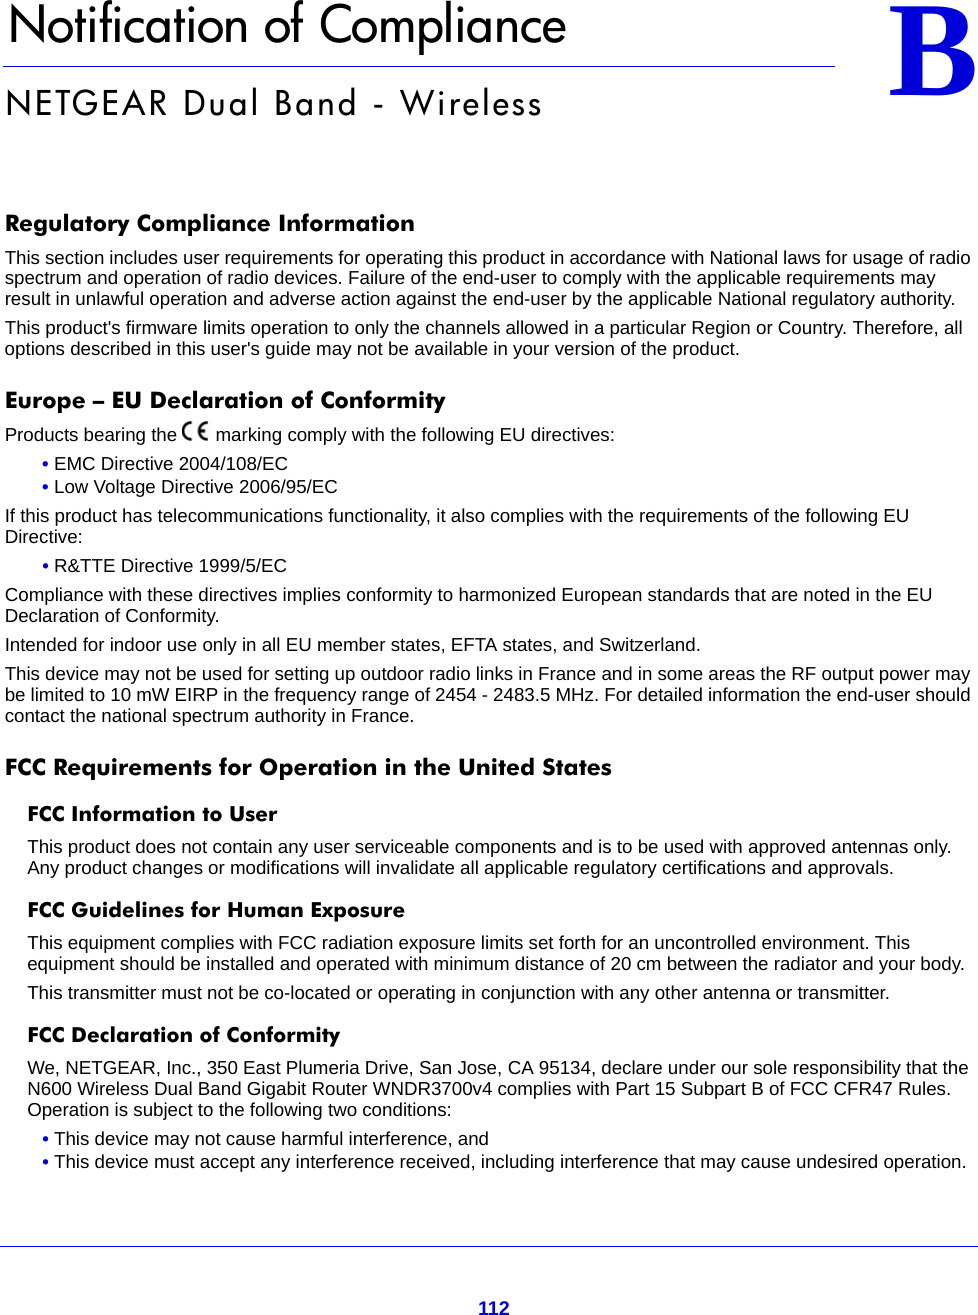 112BB.   Notification of ComplianceNETGEAR Dual Band - WirelessRegulatory Compliance InformationThis section includes user requirements for operating this product in accordance with National laws for usage of radio spectrum and operation of radio devices. Failure of the end-user to comply with the applicable requirements may result in unlawful operation and adverse action against the end-user by the applicable National regulatory authority.This product&apos;s firmware limits operation to only the channels allowed in a particular Region or Country. Therefore, all options described in this user&apos;s guide may not be available in your version of the product.Europe – EU Declaration of Conformity Products bearing the marking comply with the following EU directives:• EMC Directive 2004/108/EC• Low Voltage Directive 2006/95/ECIf this product has telecommunications functionality, it also complies with the requirements of the following EU Directive:• R&amp;TTE Directive 1999/5/ECCompliance with these directives implies conformity to harmonized European standards that are noted in the EU Declaration of Conformity. Intended for indoor use only in all EU member states, EFTA states, and Switzerland.This device may not be used for setting up outdoor radio links in France and in some areas the RF output power may be limited to 10 mW EIRP in the frequency range of 2454 - 2483.5 MHz. For detailed information the end-user should contact the national spectrum authority in France.FCC Requirements for Operation in the United States FCC Information to UserThis product does not contain any user serviceable components and is to be used with approved antennas only. Any product changes or modifications will invalidate all applicable regulatory certifications and approvals.FCC Guidelines for Human ExposureThis equipment complies with FCC radiation exposure limits set forth for an uncontrolled environment. This equipment should be installed and operated with minimum distance of 20 cm between the radiator and your body.This transmitter must not be co-located or operating in conjunction with any other antenna or transmitter. FCC Declaration of ConformityWe, NETGEAR, Inc., 350 East Plumeria Drive, San Jose, CA 95134, declare under our sole responsibility that the N600 Wireless Dual Band Gigabit Router WNDR3700v4 complies with Part 15 Subpart B of FCC CFR47 Rules. Operation is subject to the following two conditions:• This device may not cause harmful interference, and• This device must accept any interference received, including interference that may cause undesired operation.